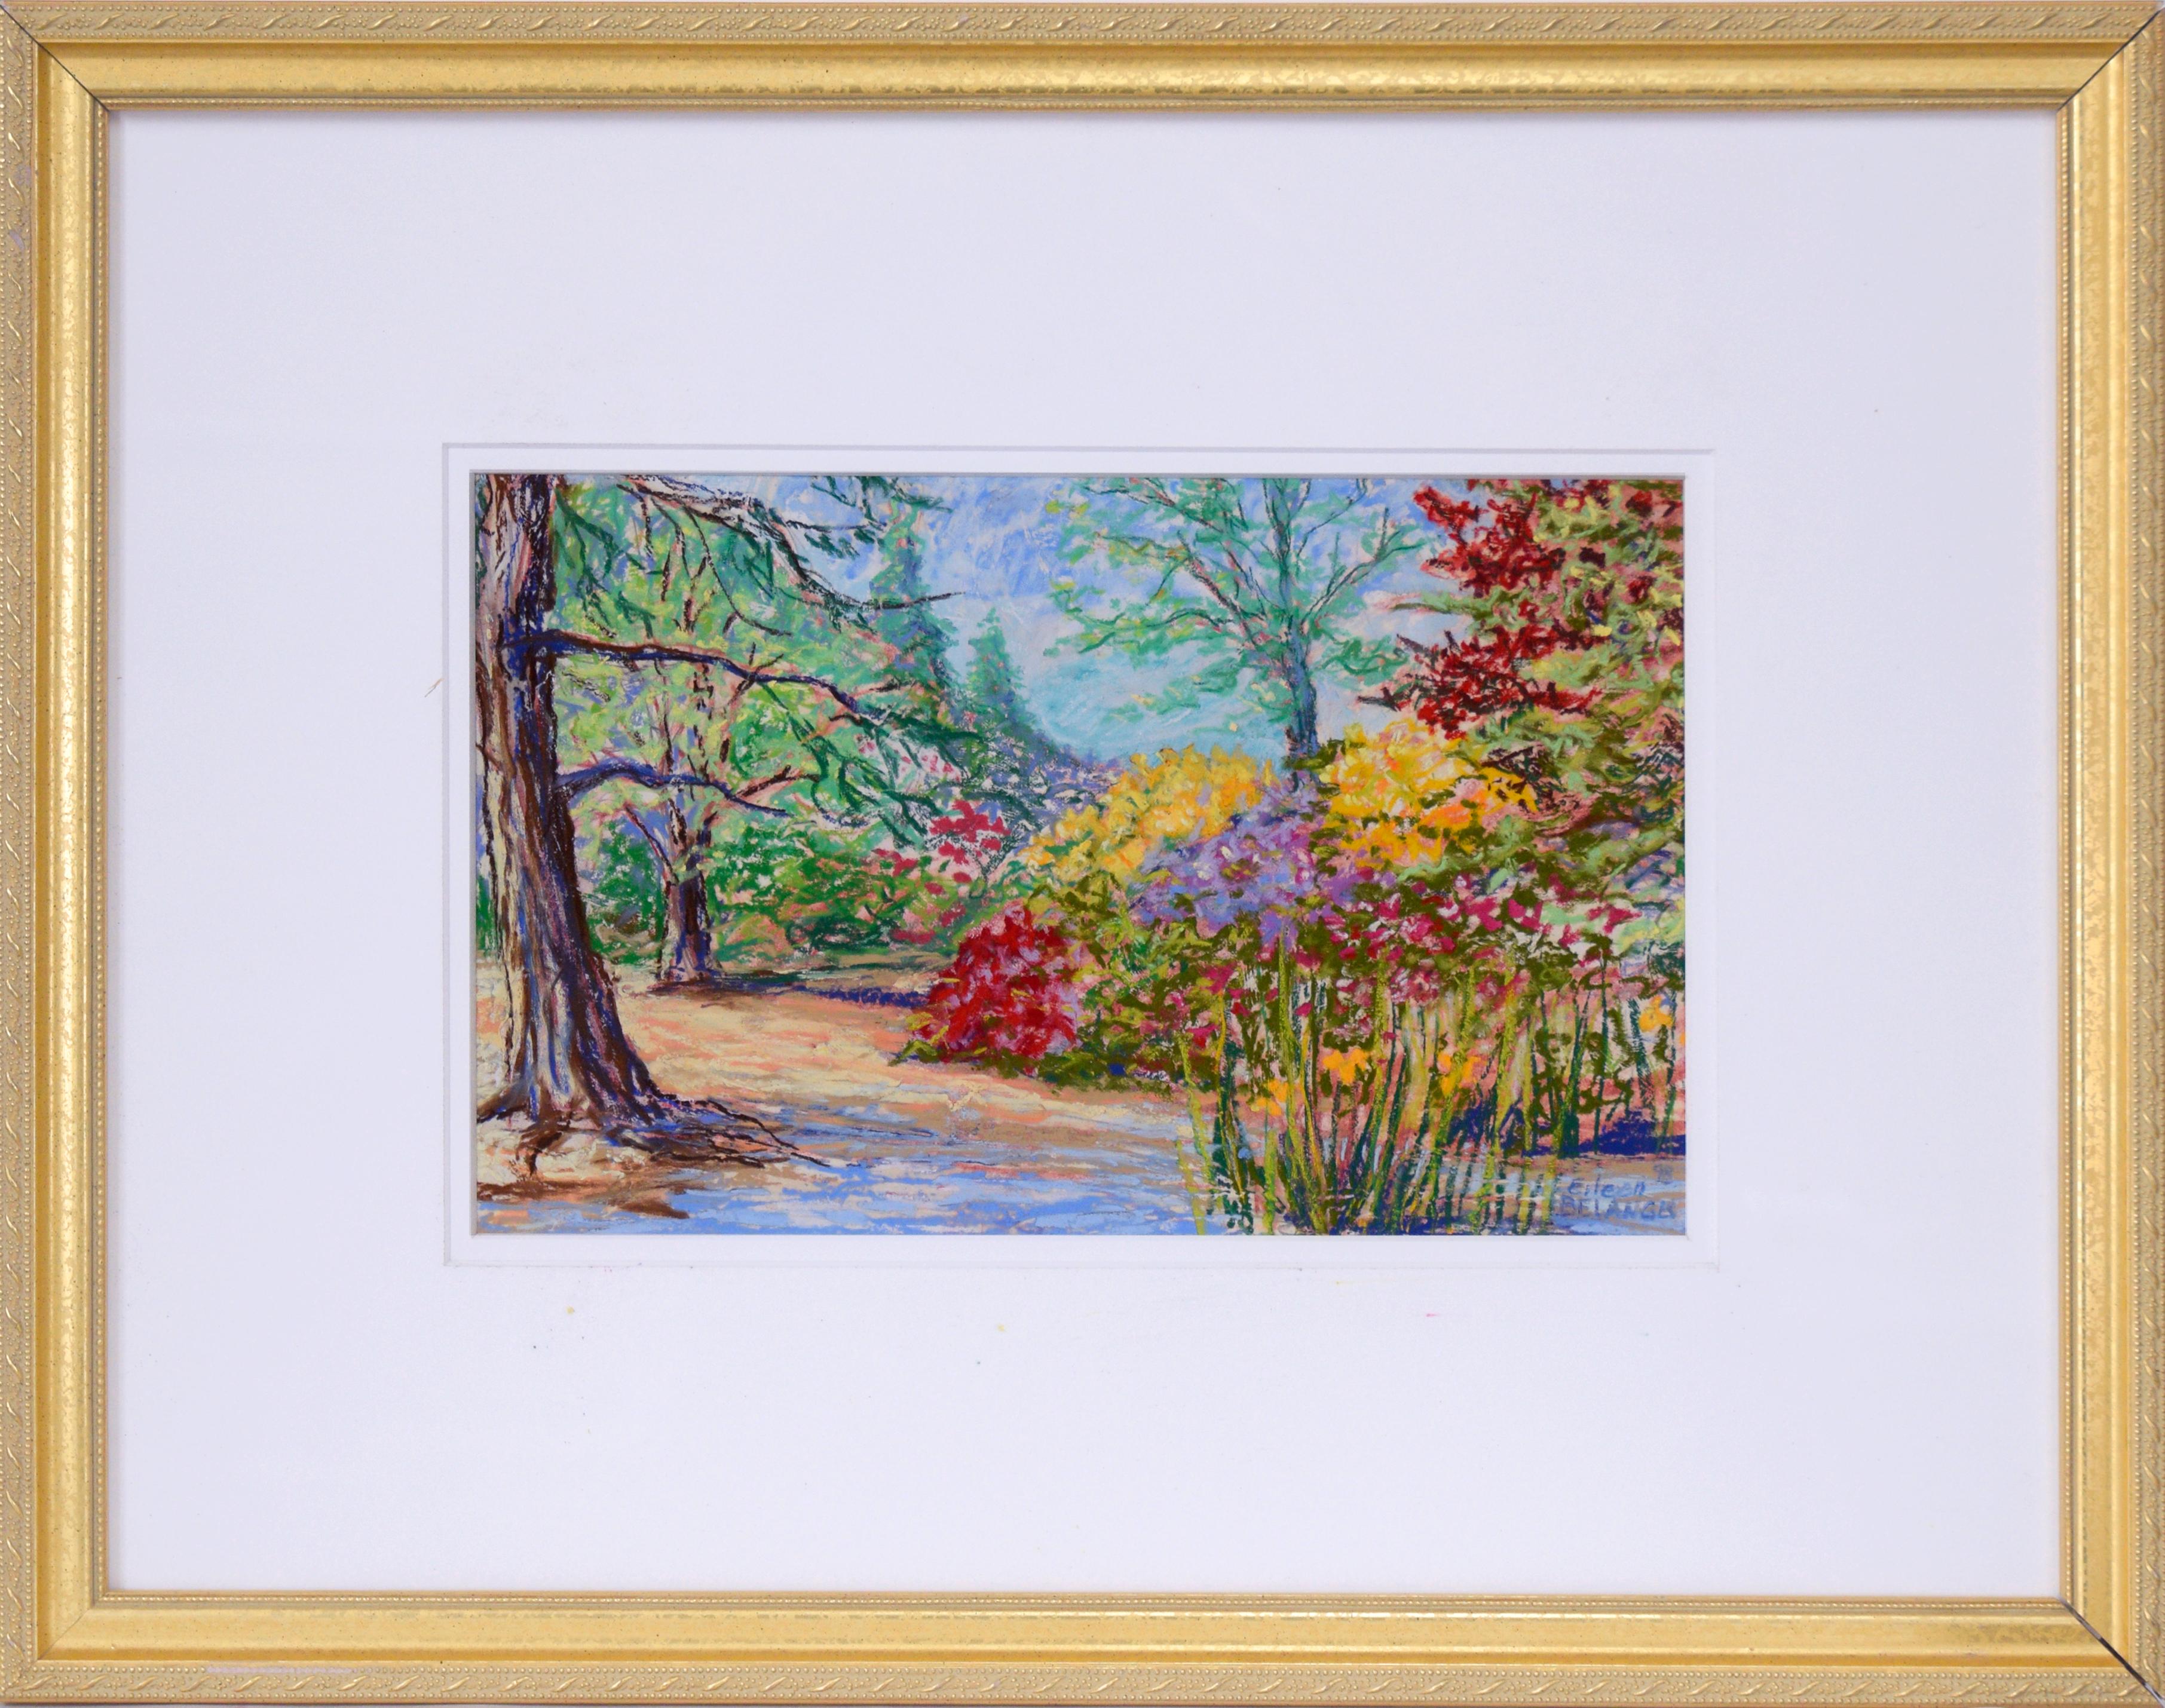 Over the Pastel Garden Wall - New England - Original Oil Pastel on Paper 1998